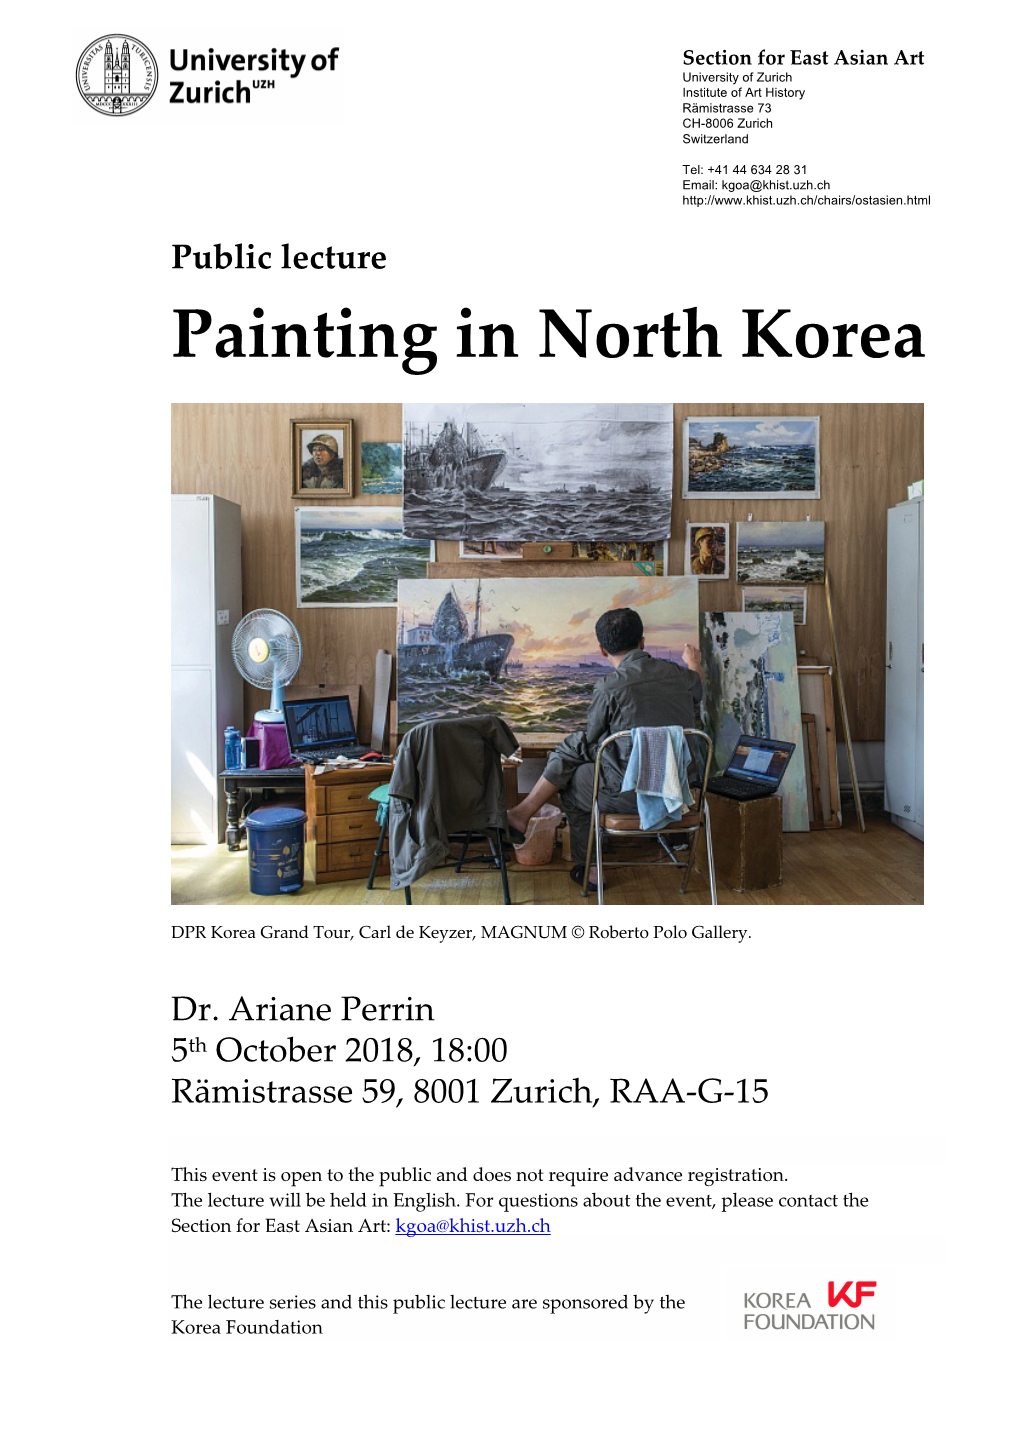 Painting in North Korea